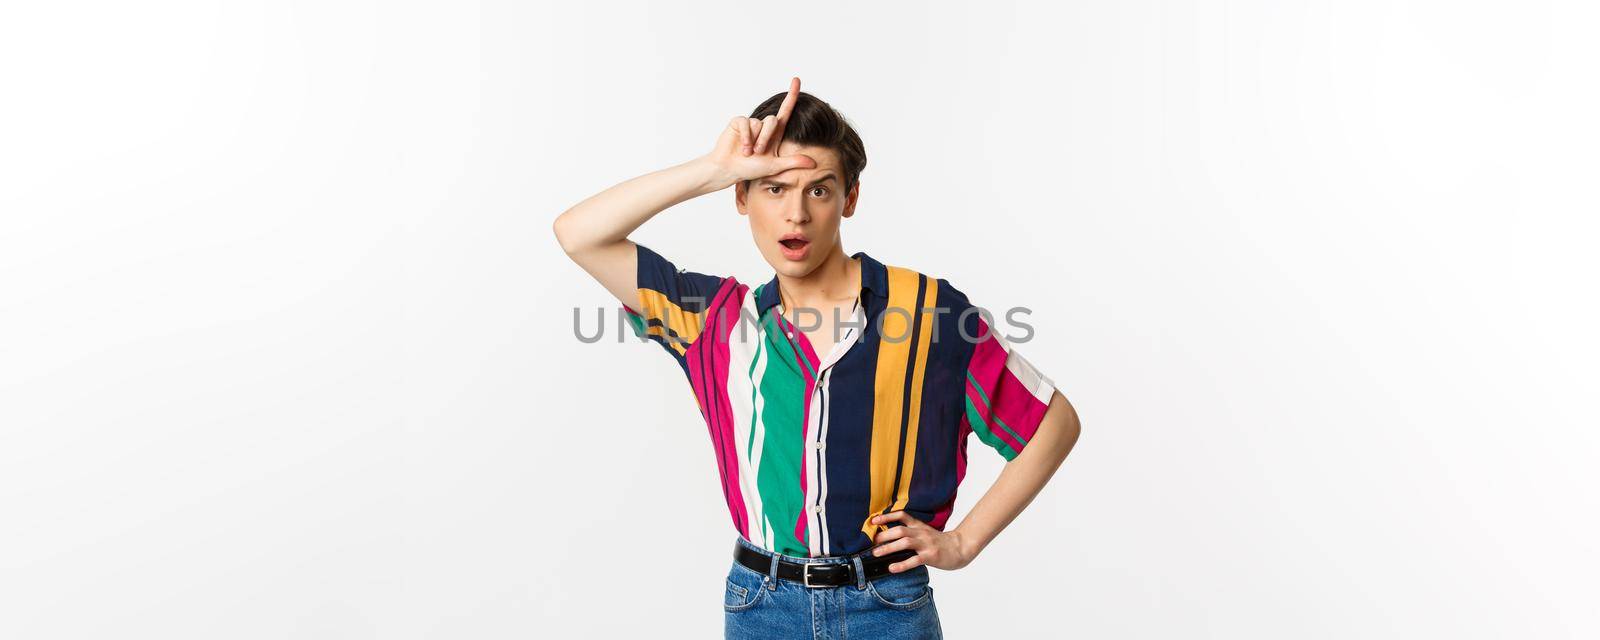 Sassy and arrogant guy showing loser sign on forehead, mocking someone, standing over white background.